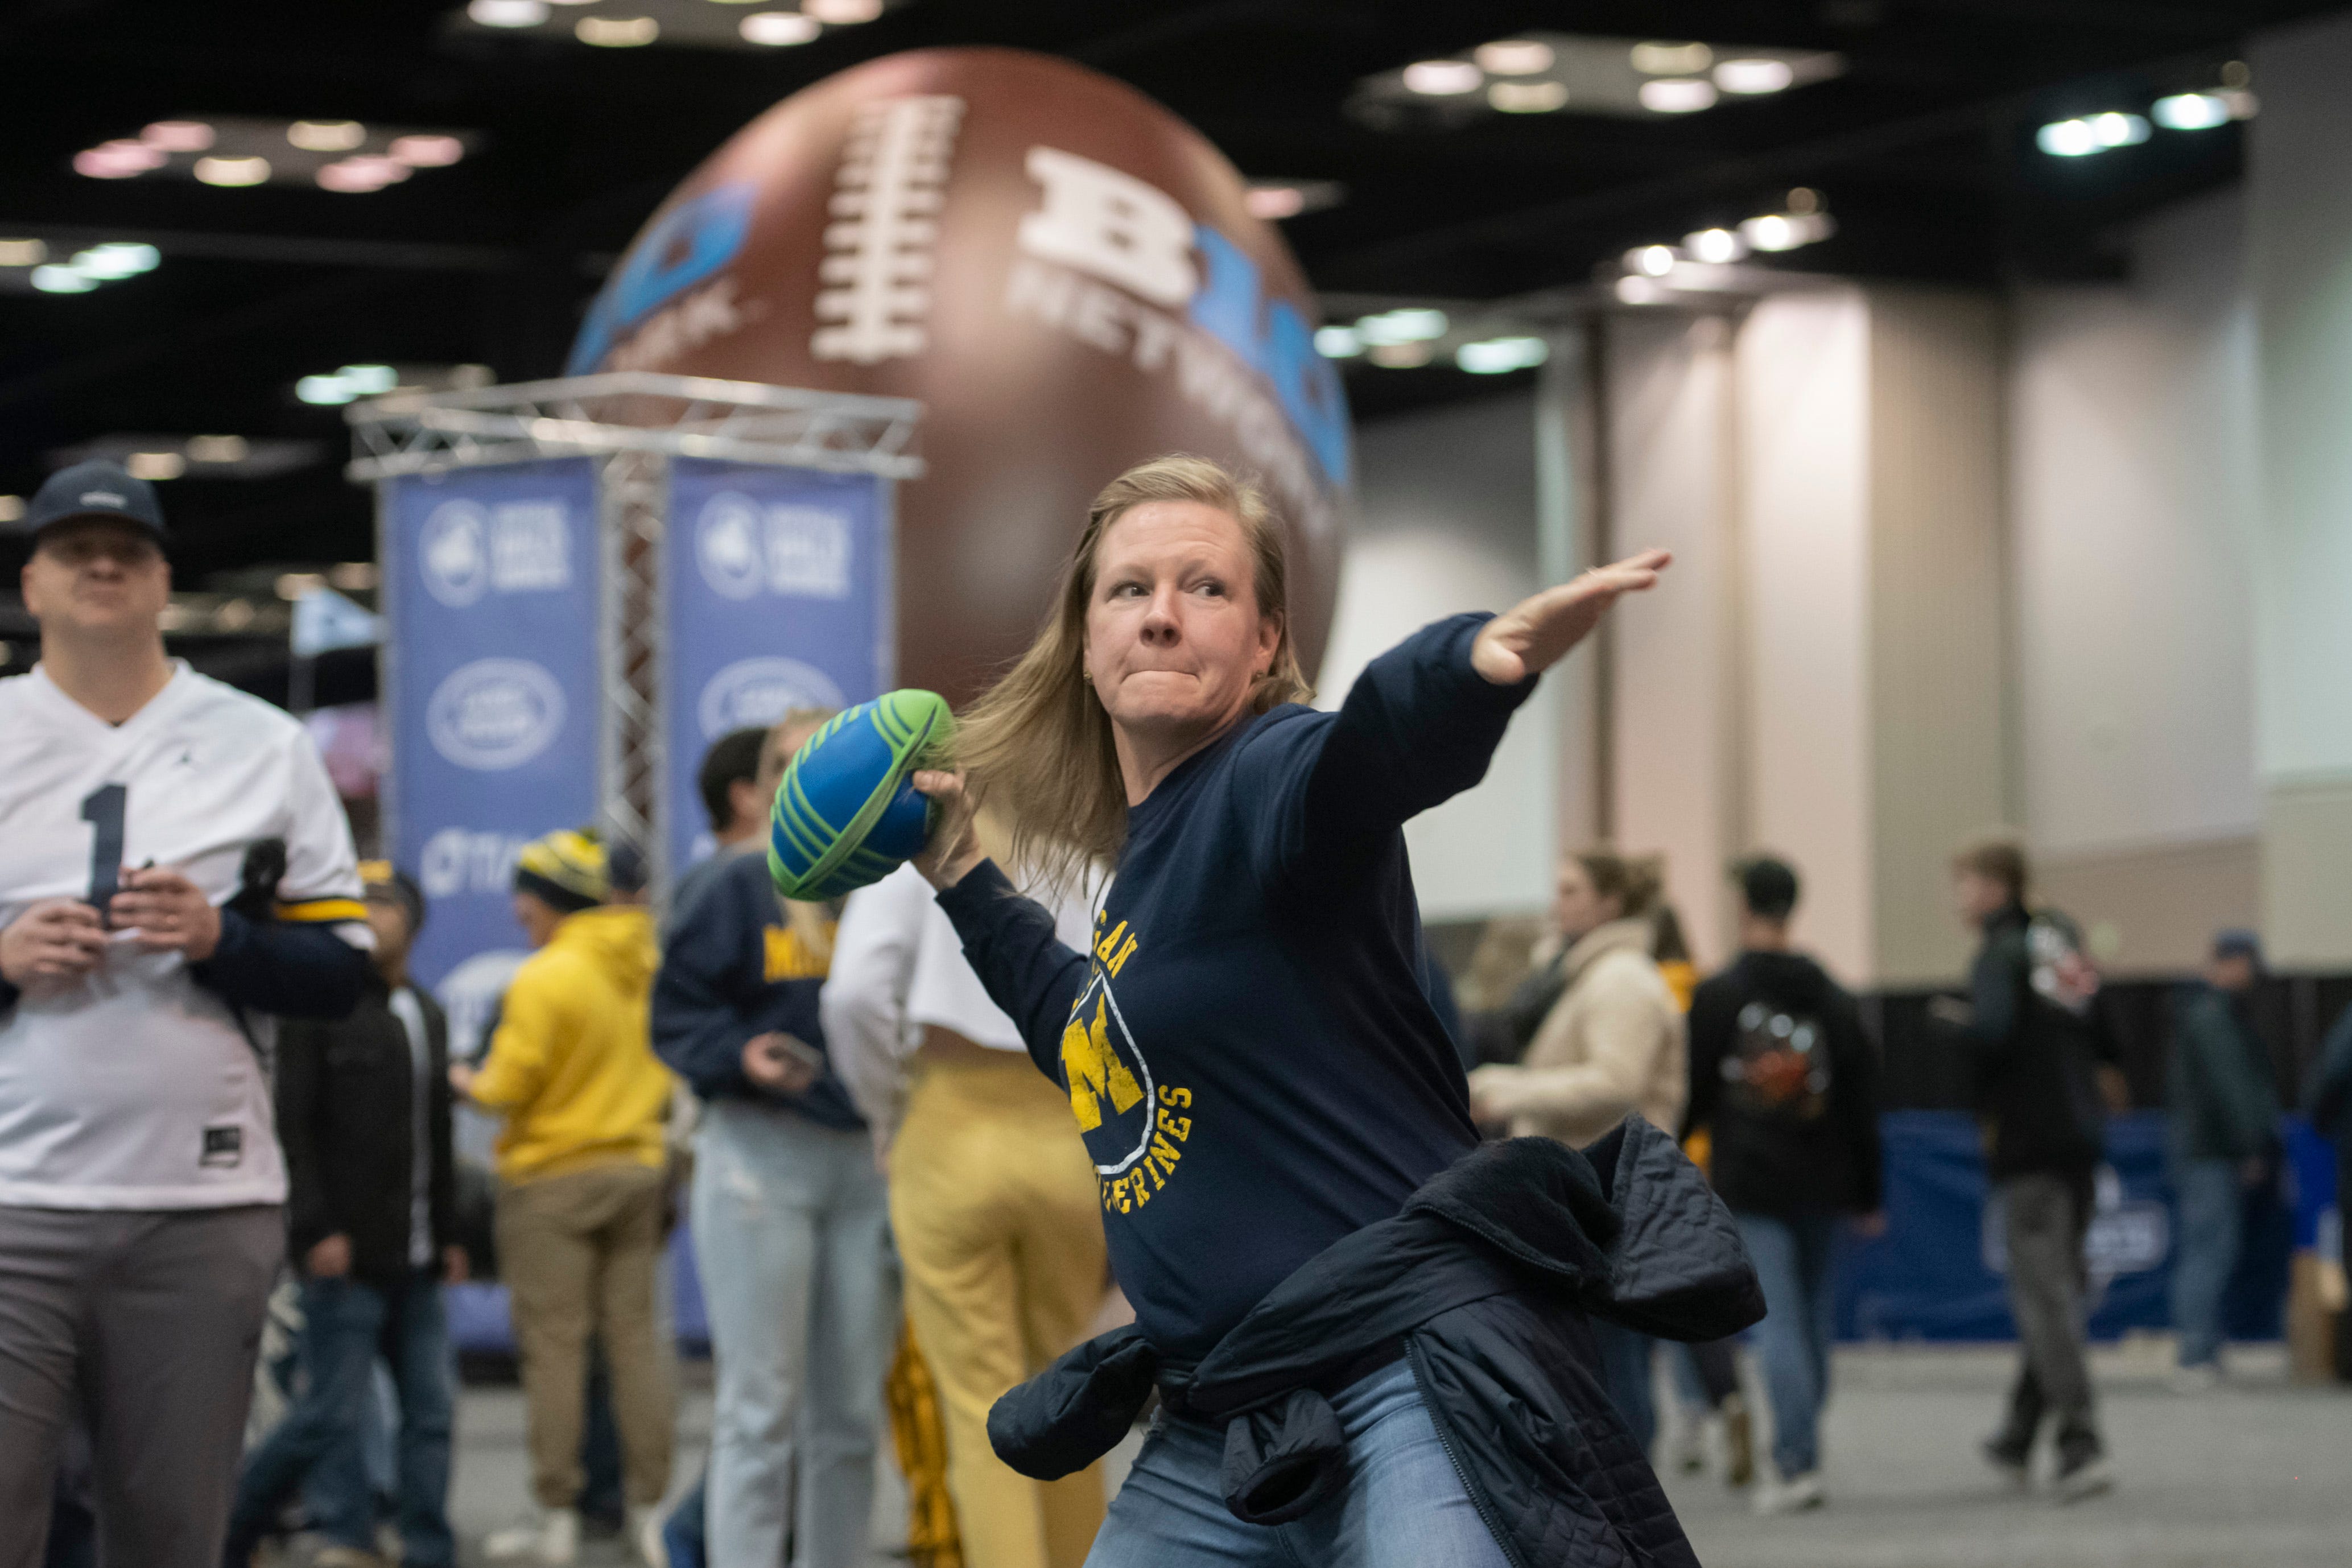 Katie Hausner, of Atlanta, throws a pass at the Fan Fest at the Indiana Convention Center, before the start of the Big Ten championship game.